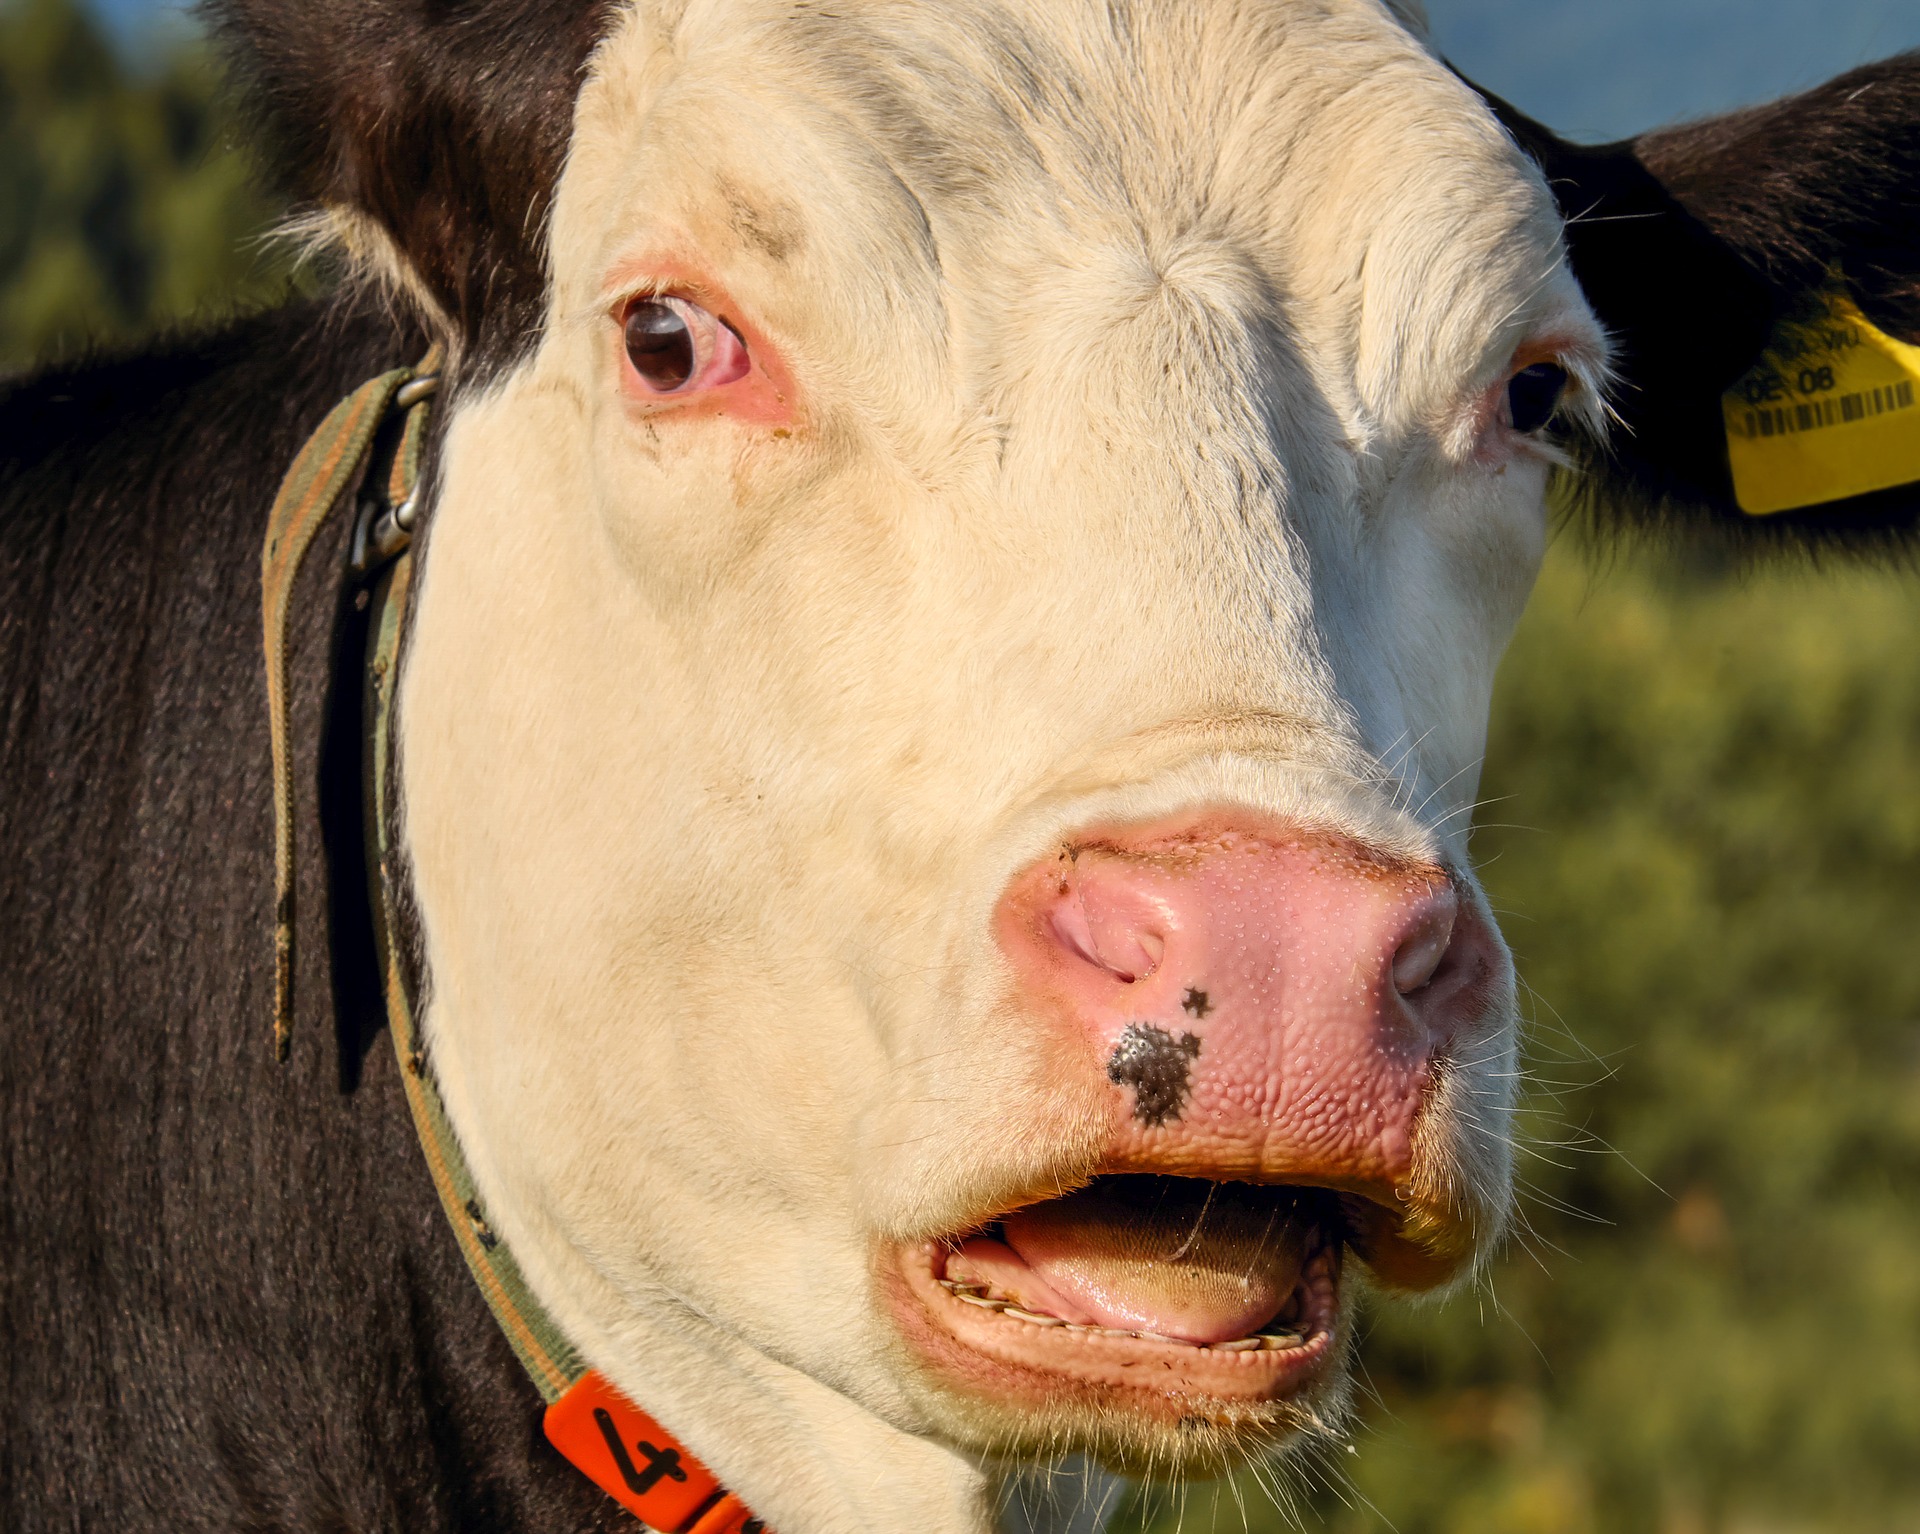 Face of cow with mouth open.